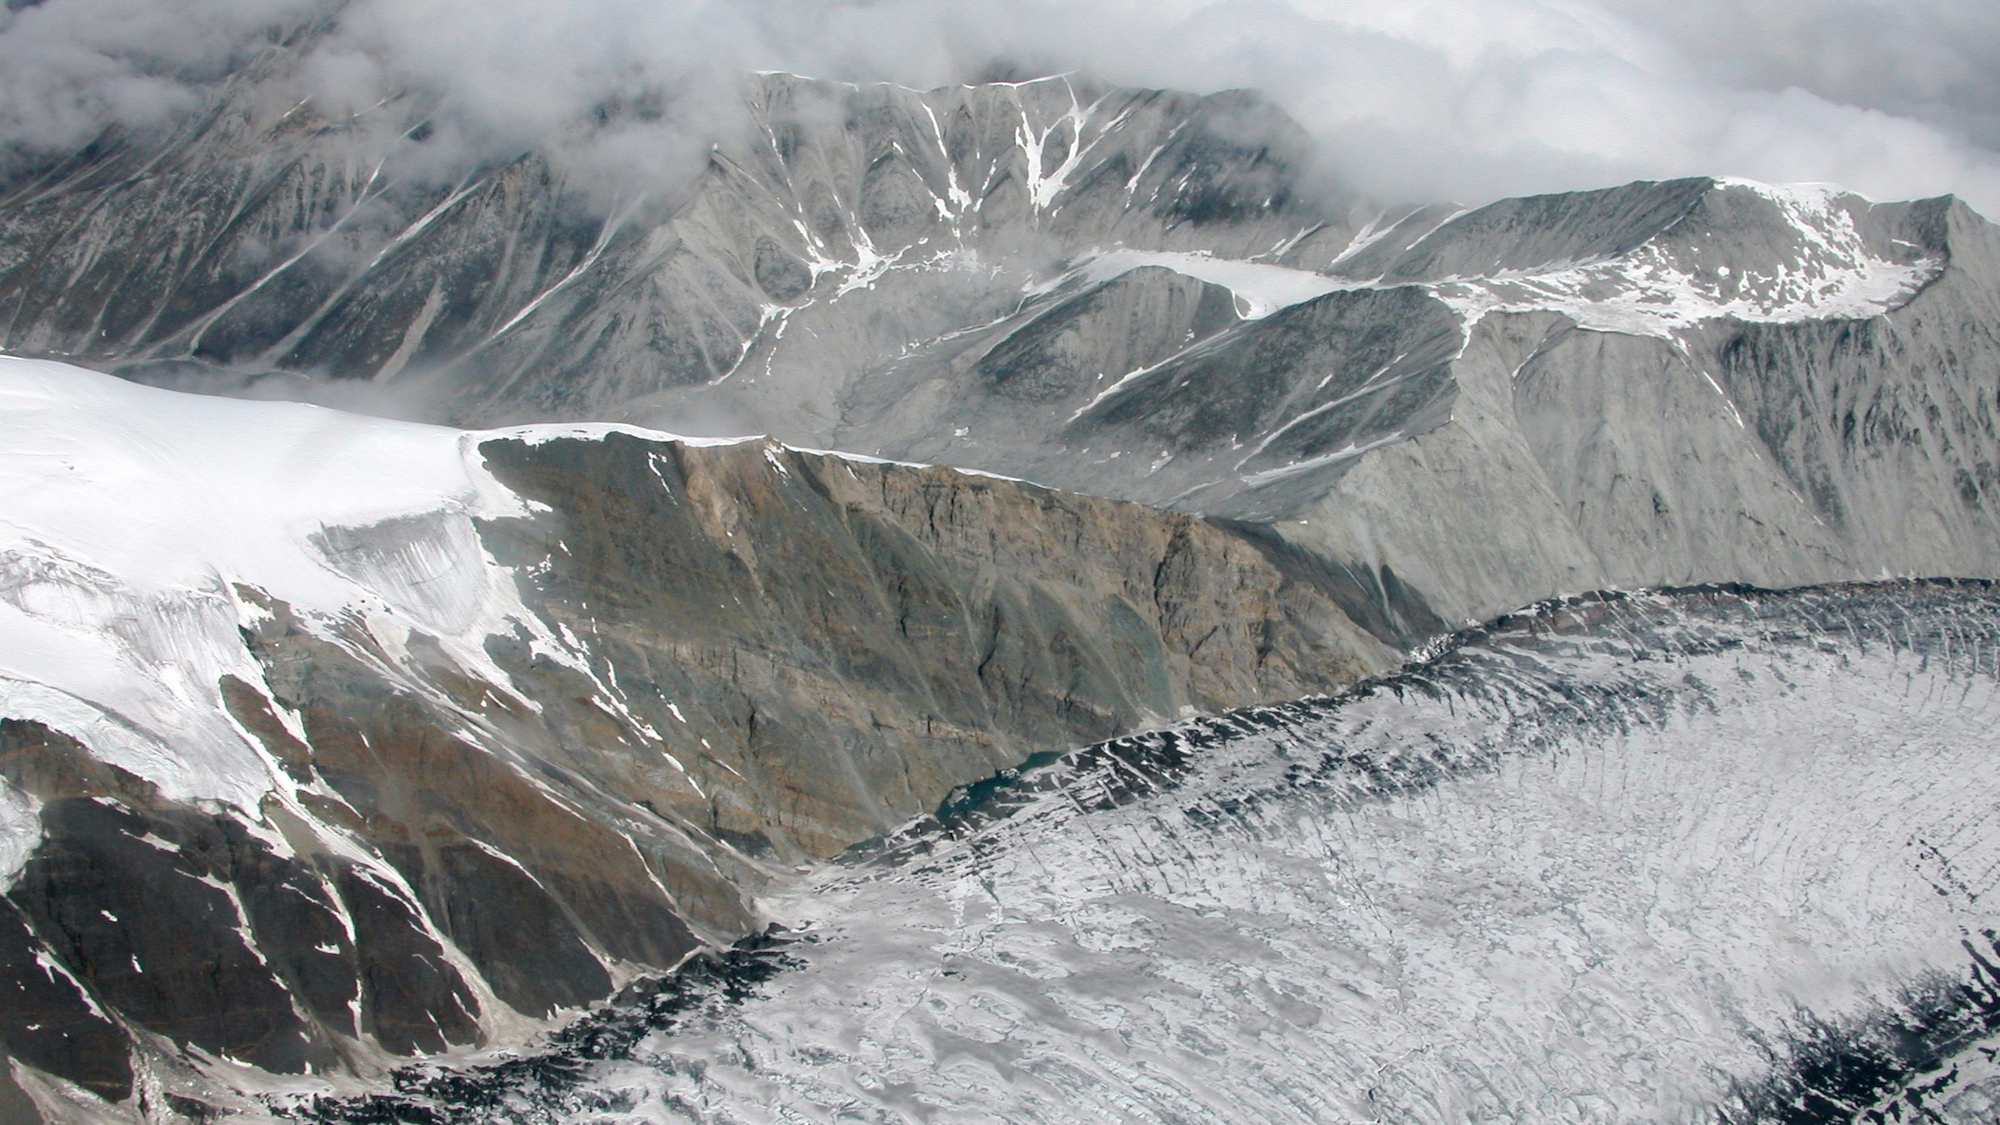 An aerial view of a glacier in Denali National Park, one of the target areas for the Snow and Ice Collection Project. Photo © Jay Cagle/Flickr through a Creative Commons license